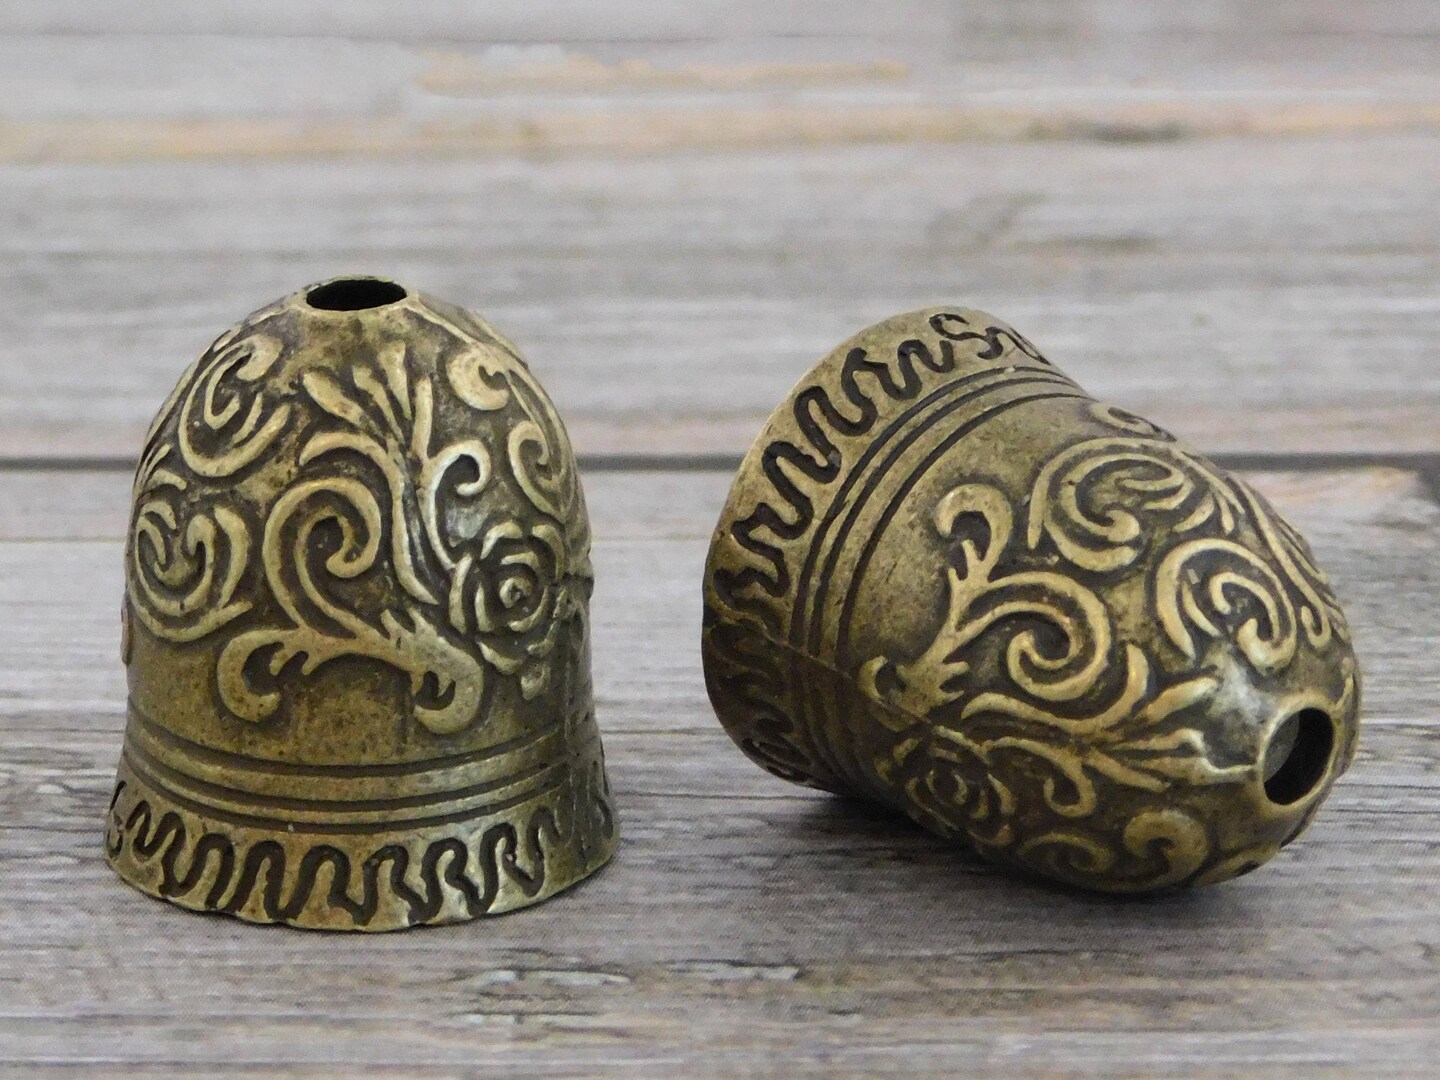 *2* 23x20mm Antique Bronze Ornate Bell Shaped Bead Caps